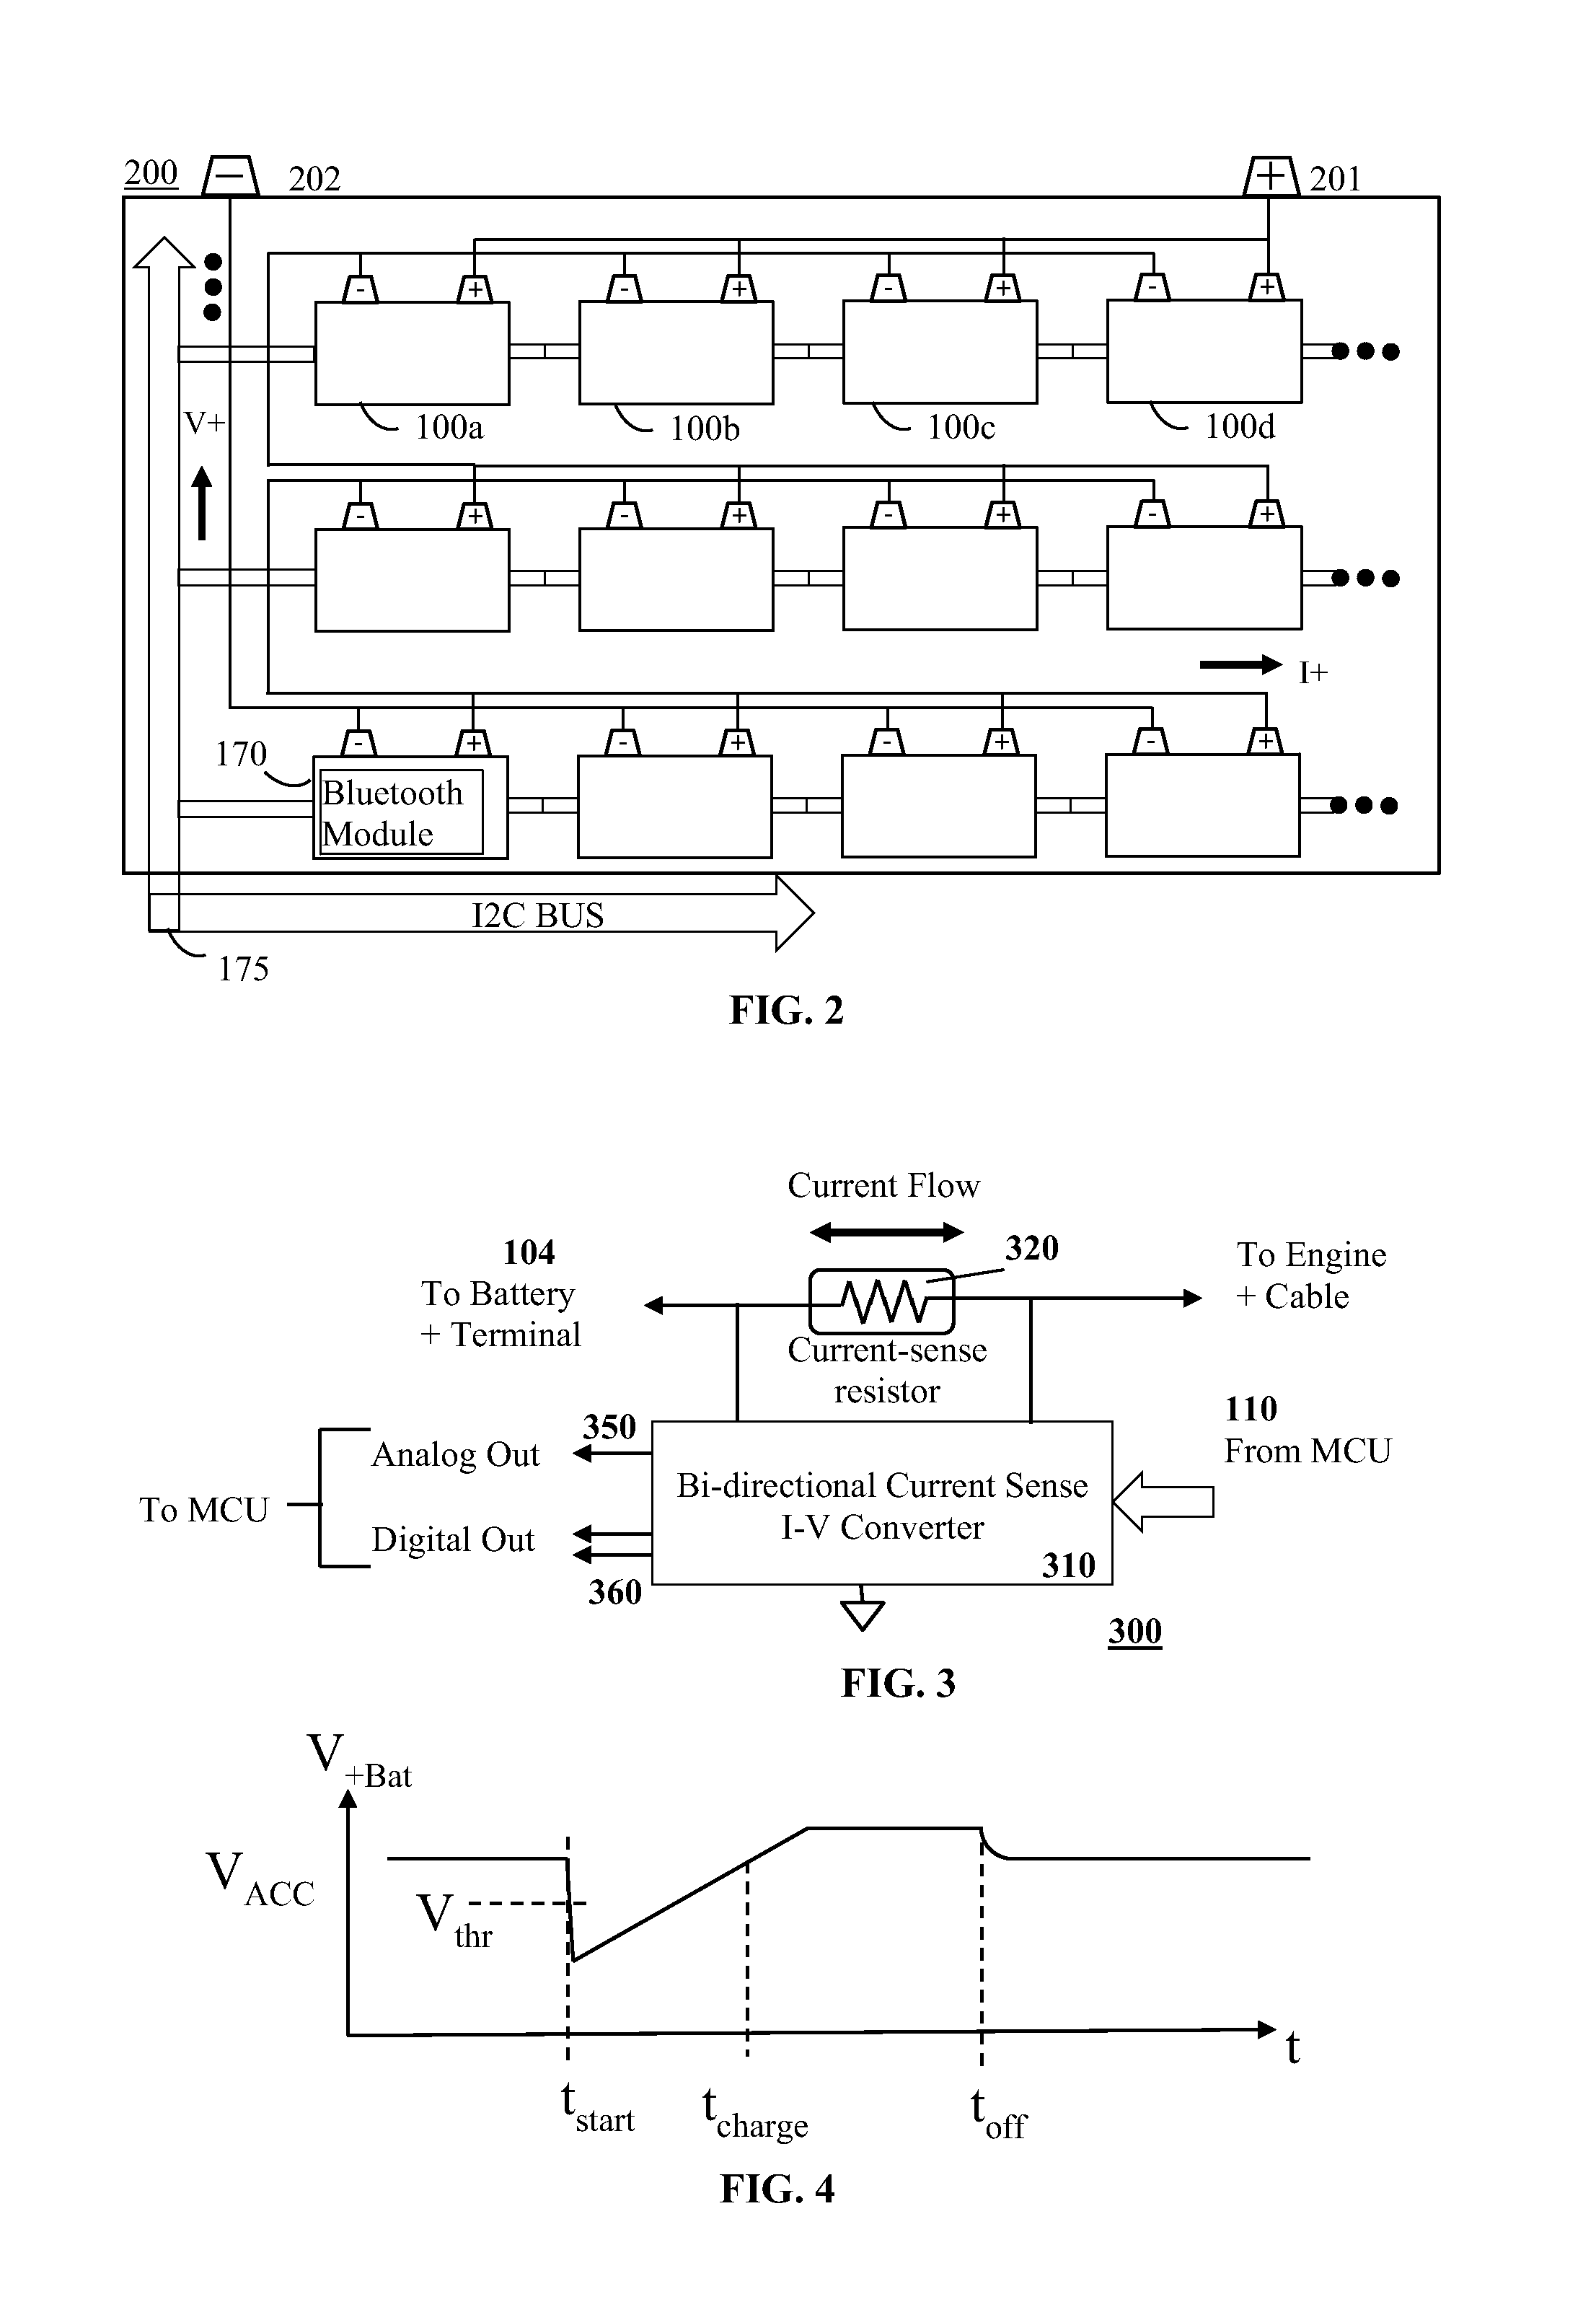 Battery module architecture with horizontal and vertical expandability